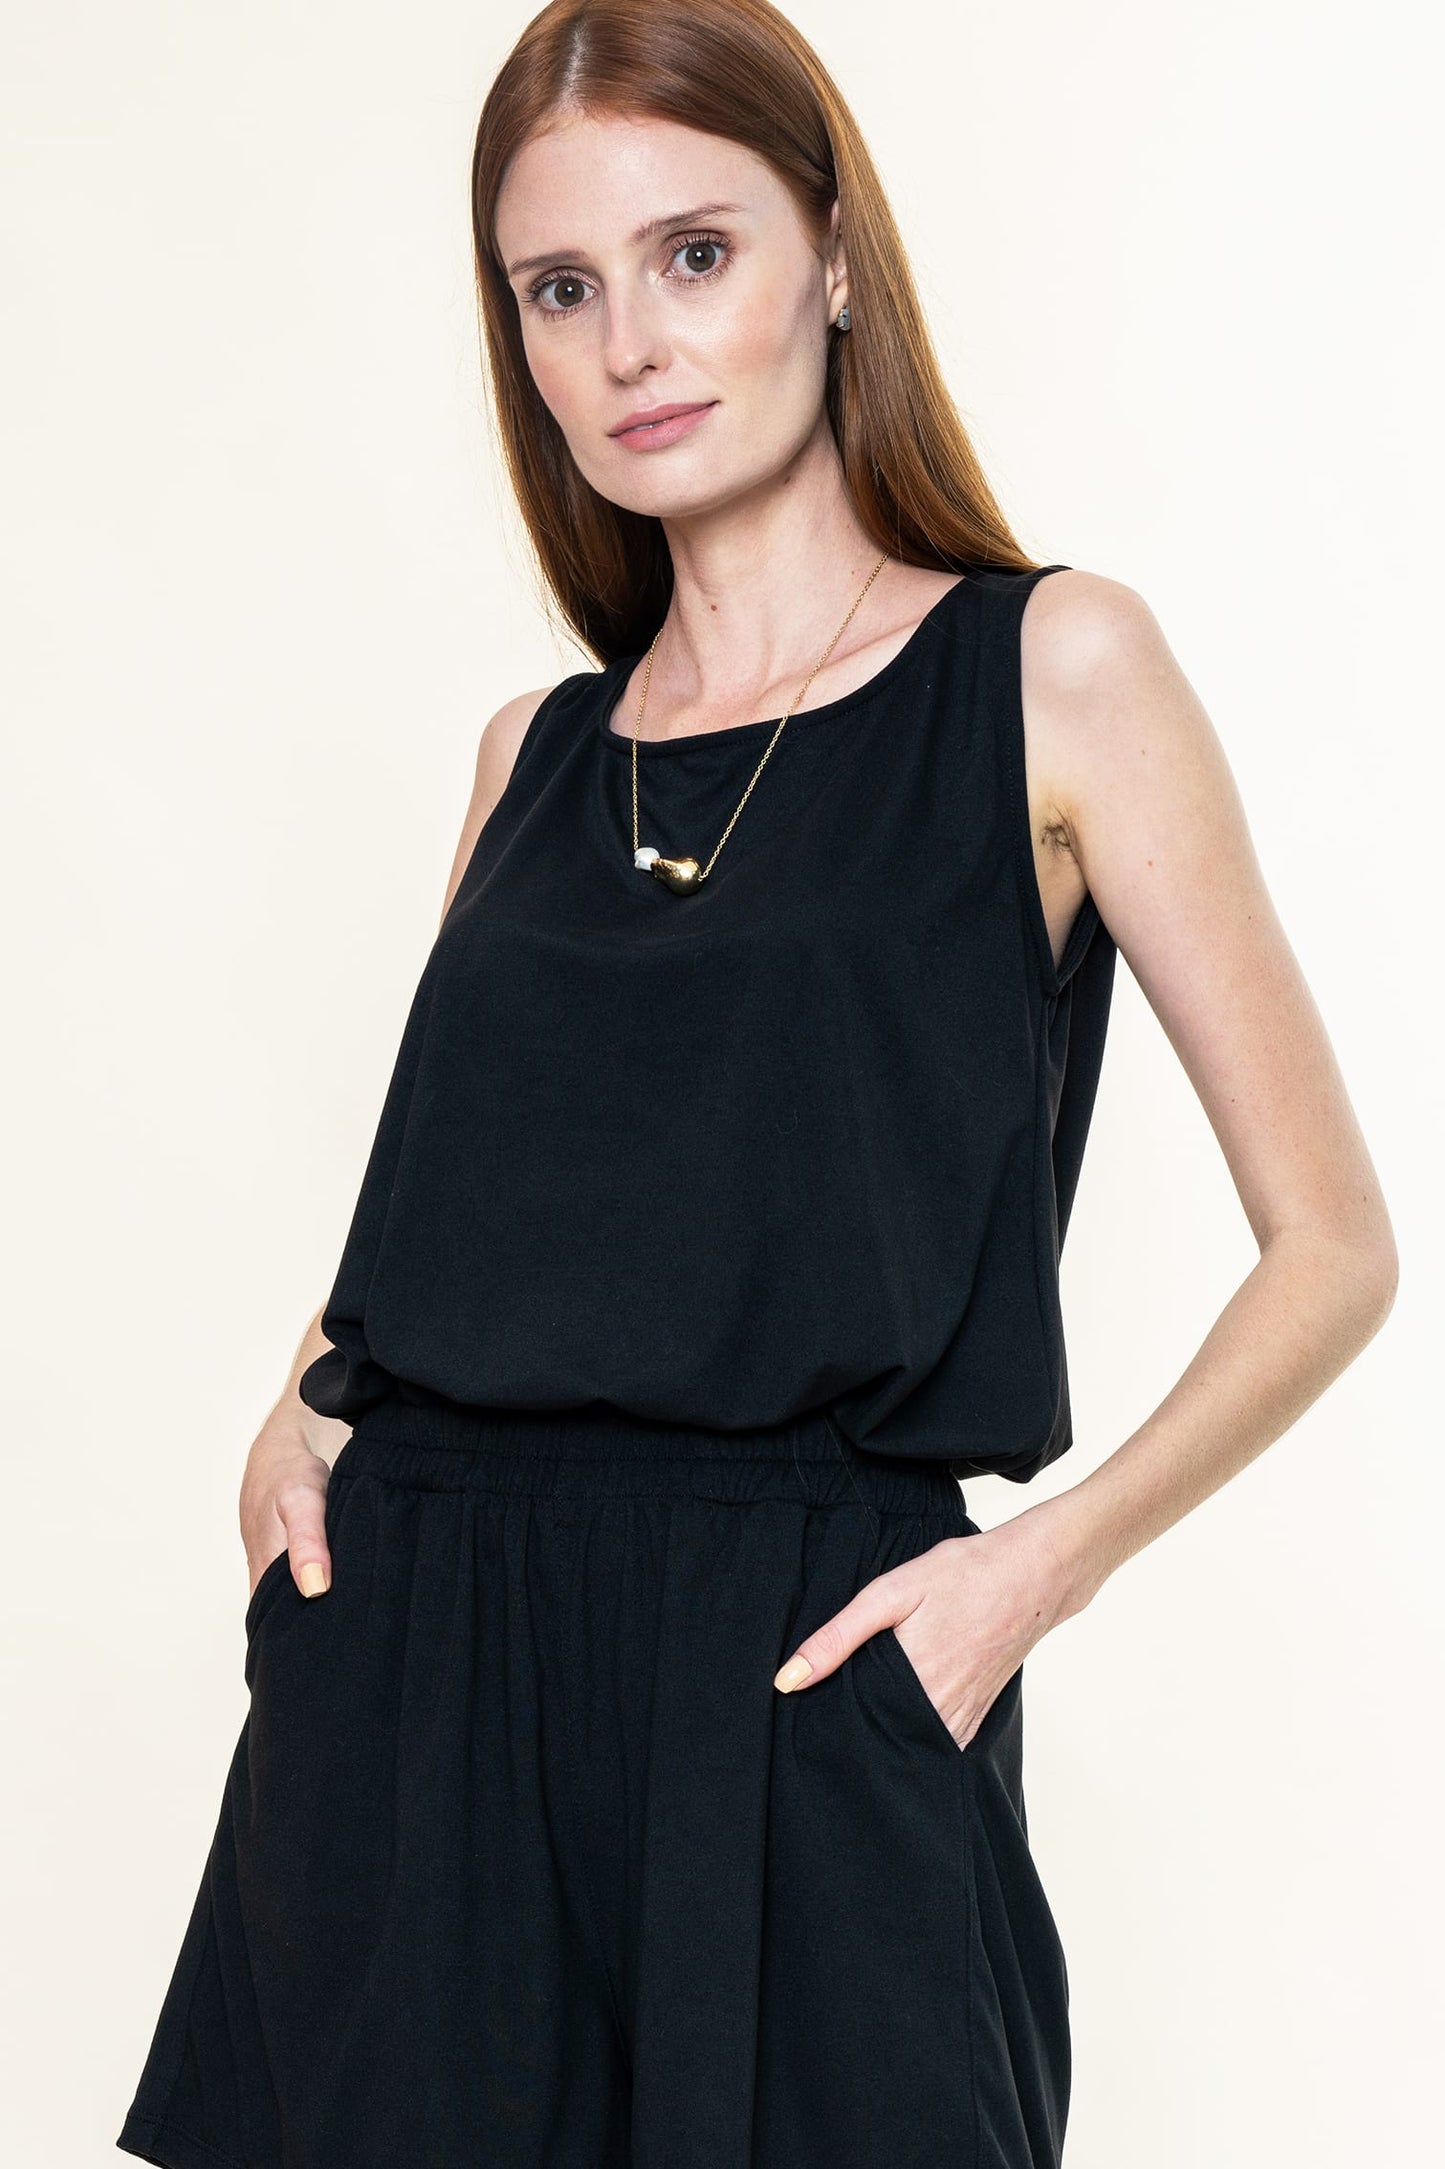 Quinale Sleeveless Shirt in Coal